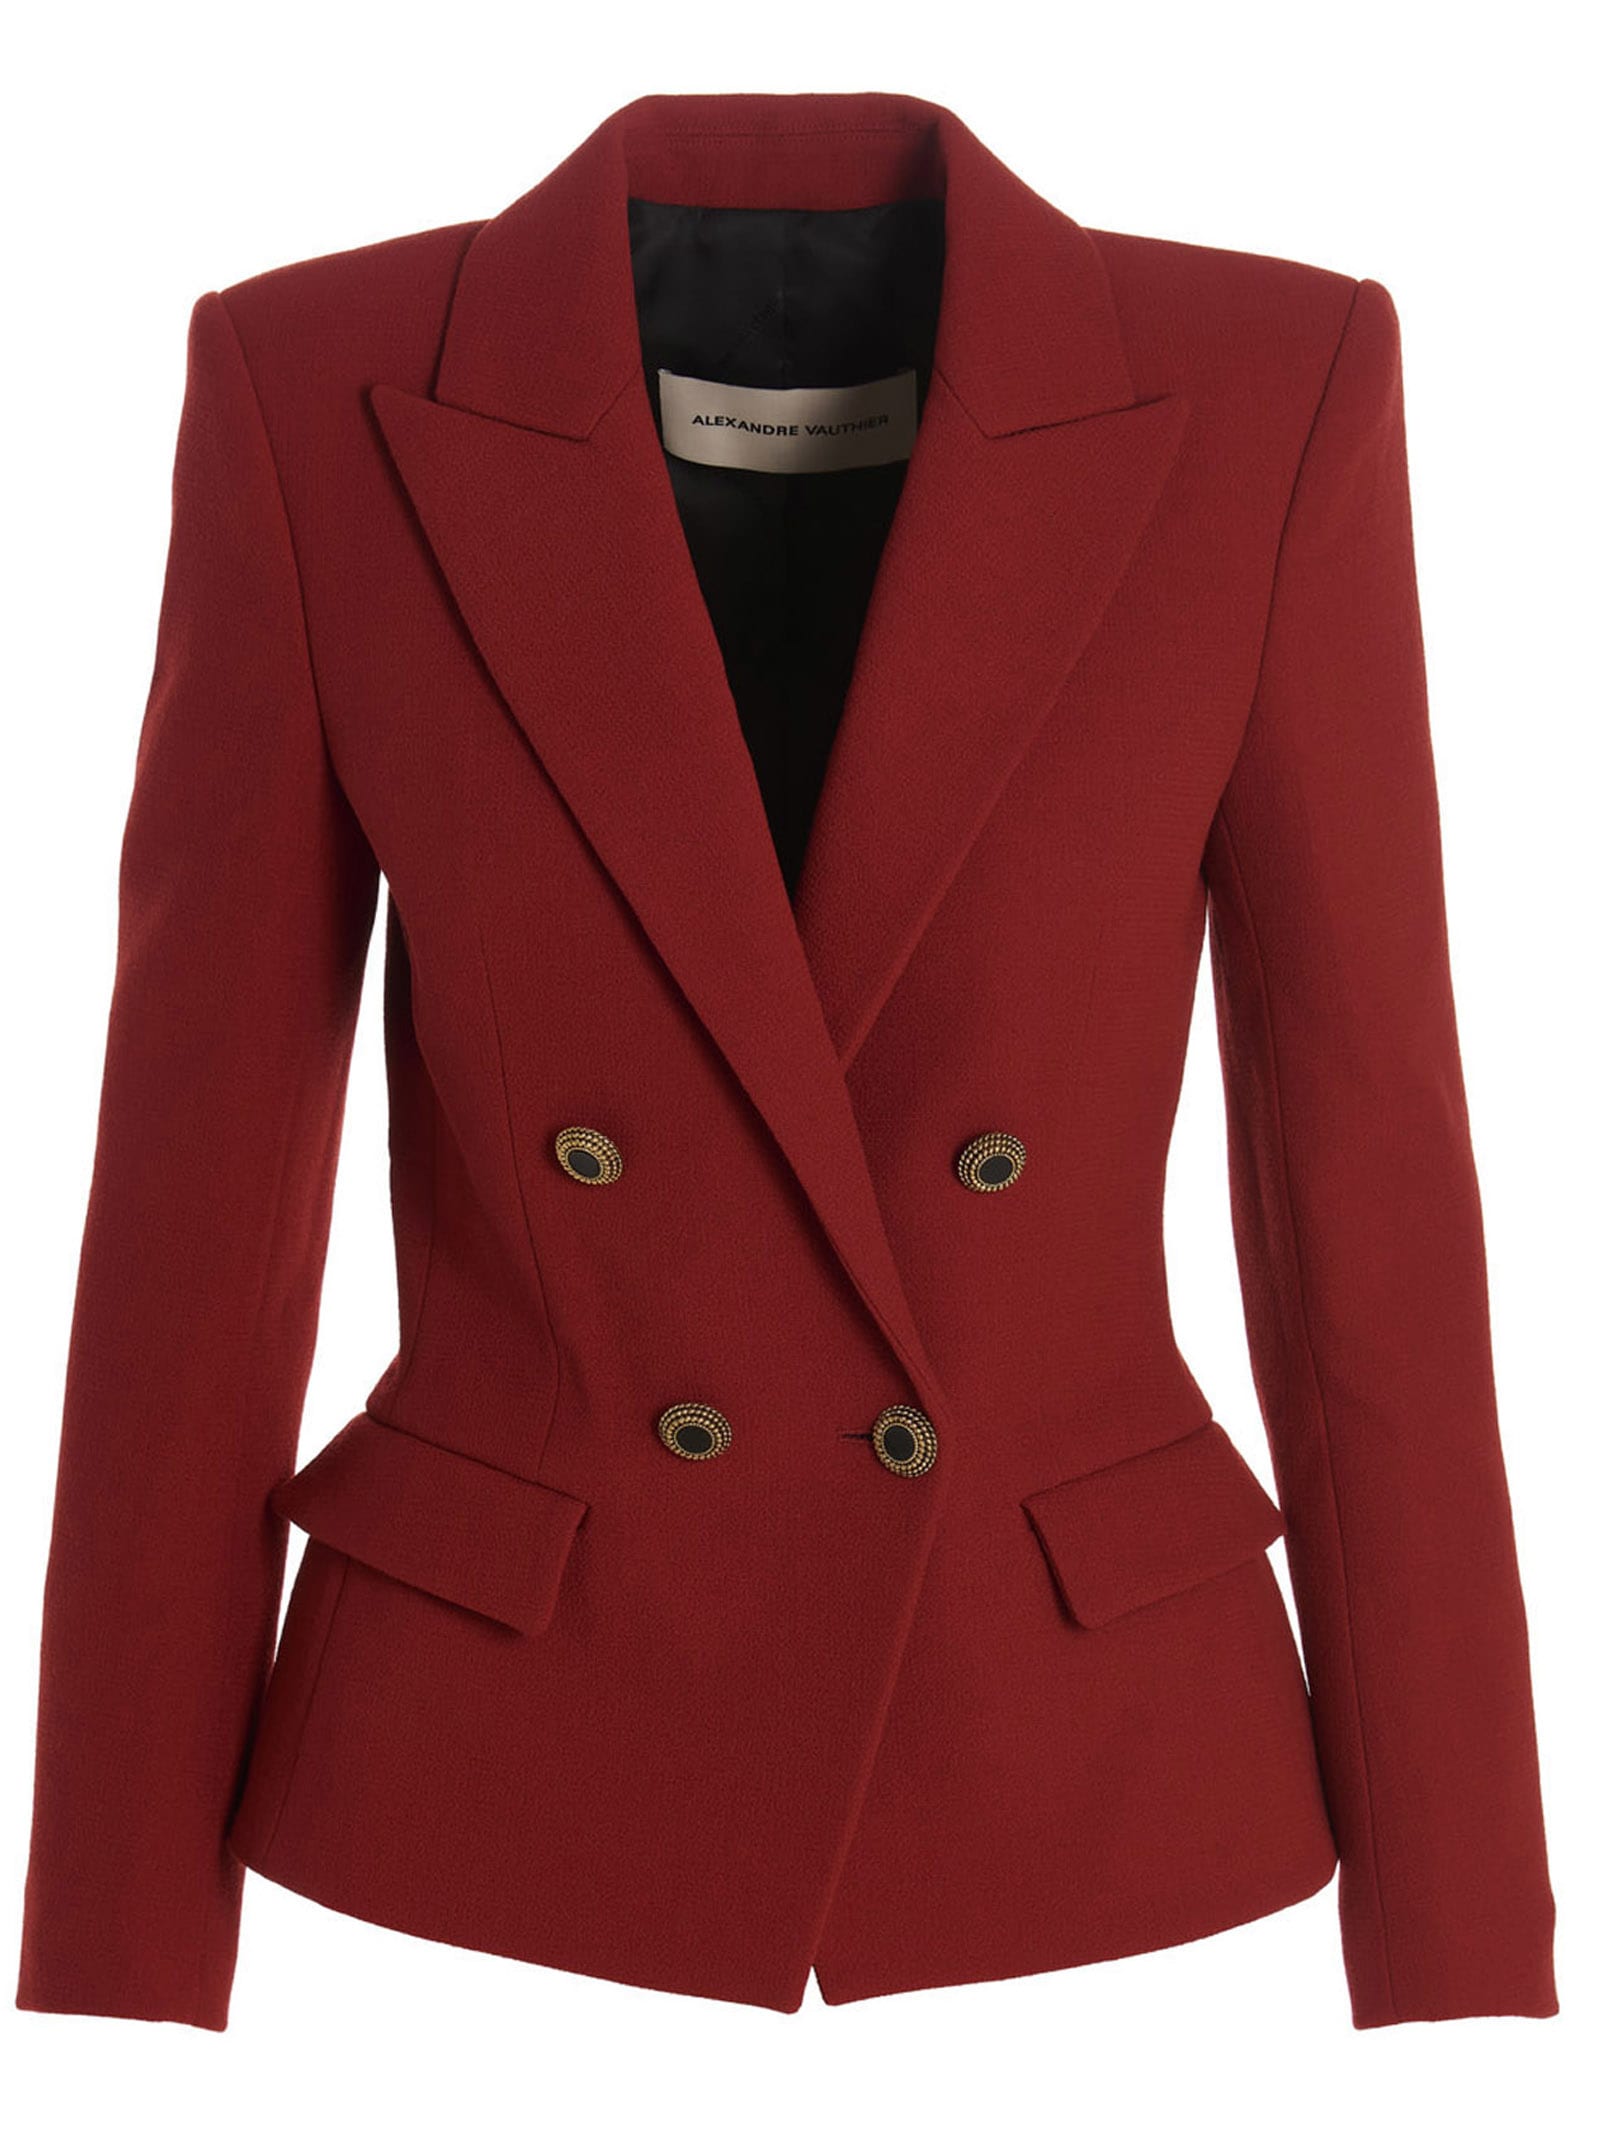 Alexandre Vauthier Double-breasted Wool Blazer Jacket